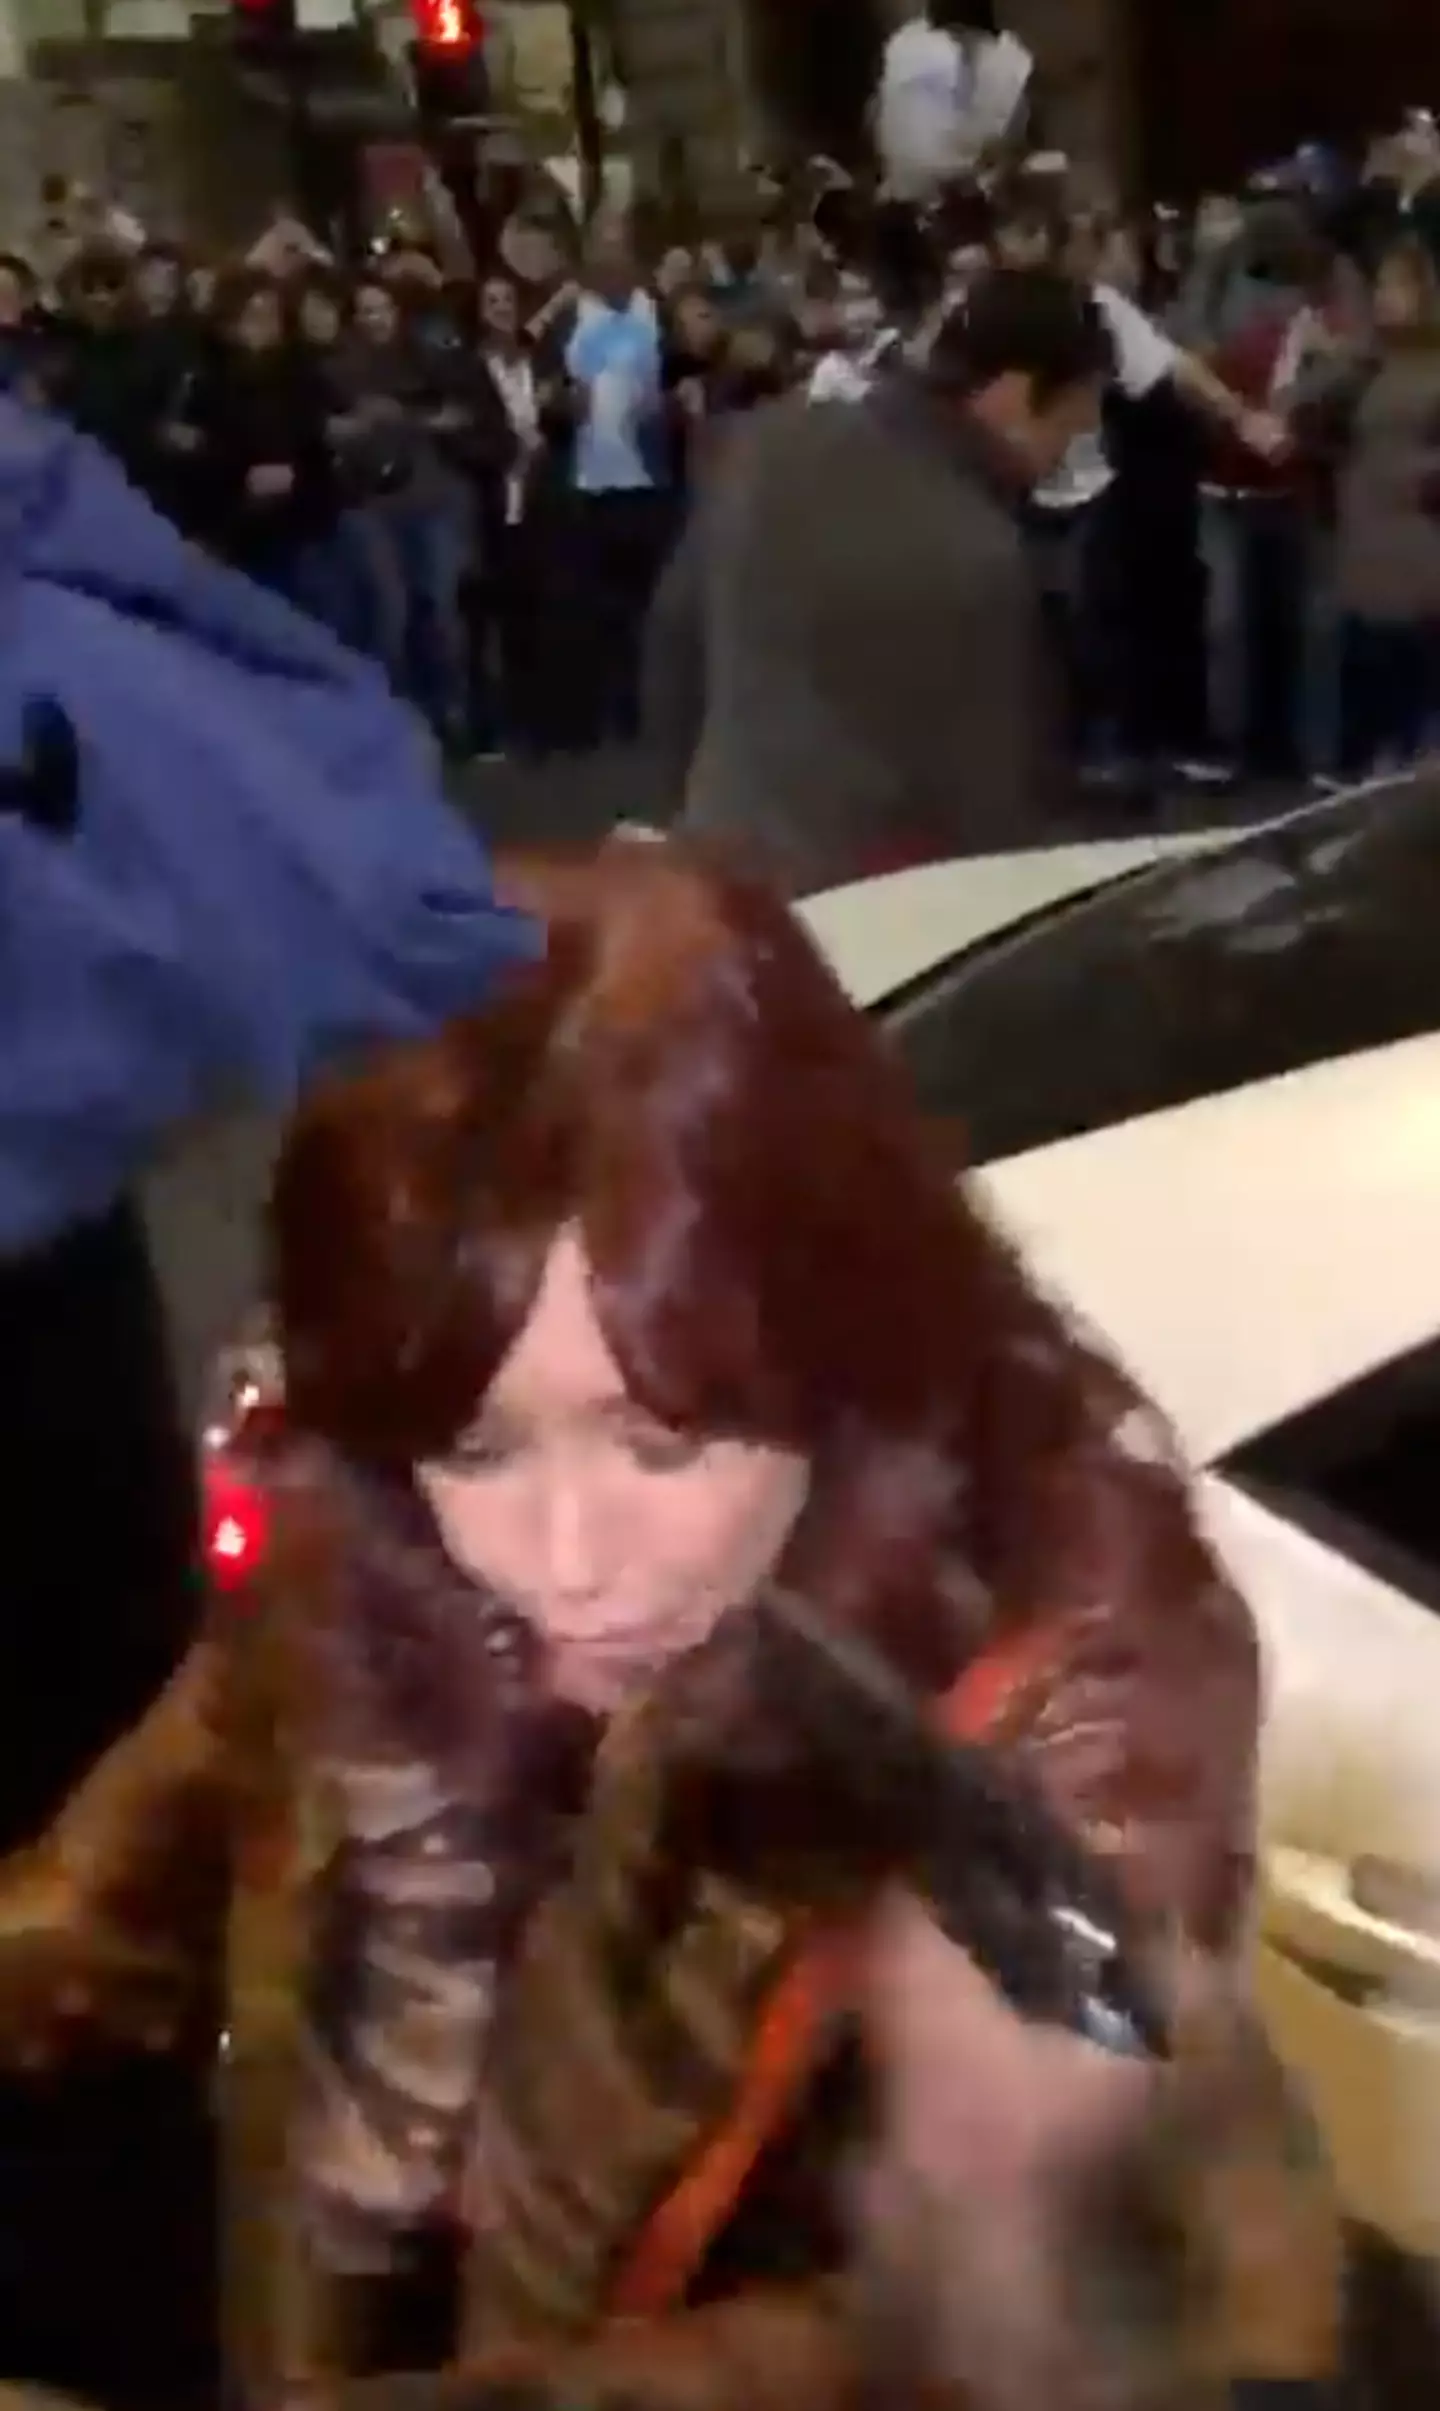 The moment the gun was pointed at Cristina Fernandez de Kirchner.